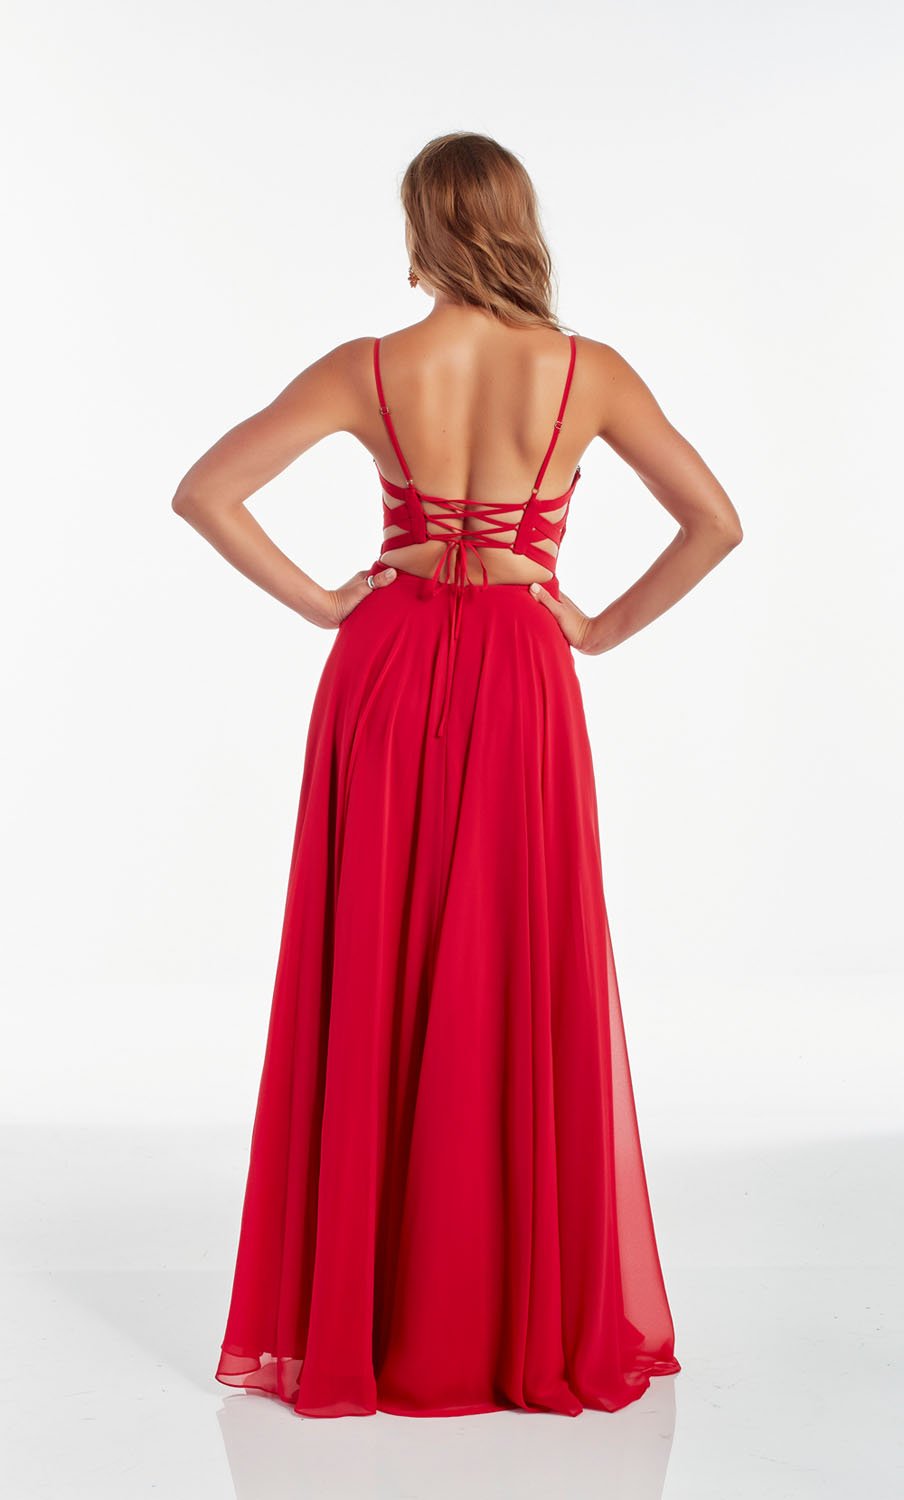 Alyce Paris 60953 dress images in these colors: Red,  Pine,    Midnight.